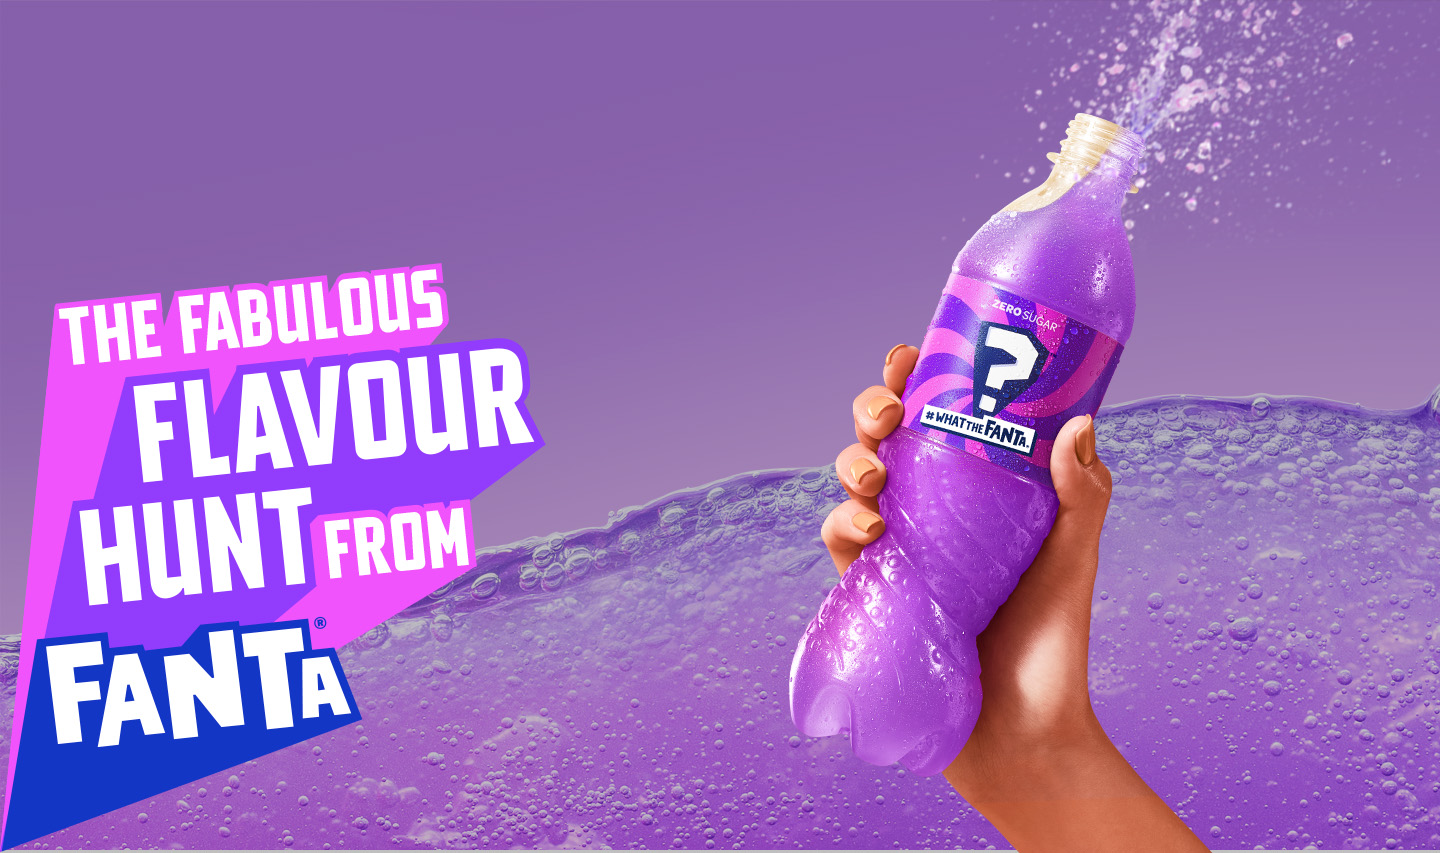 The fabulous flavour hunt from Fanta- what the Fanta